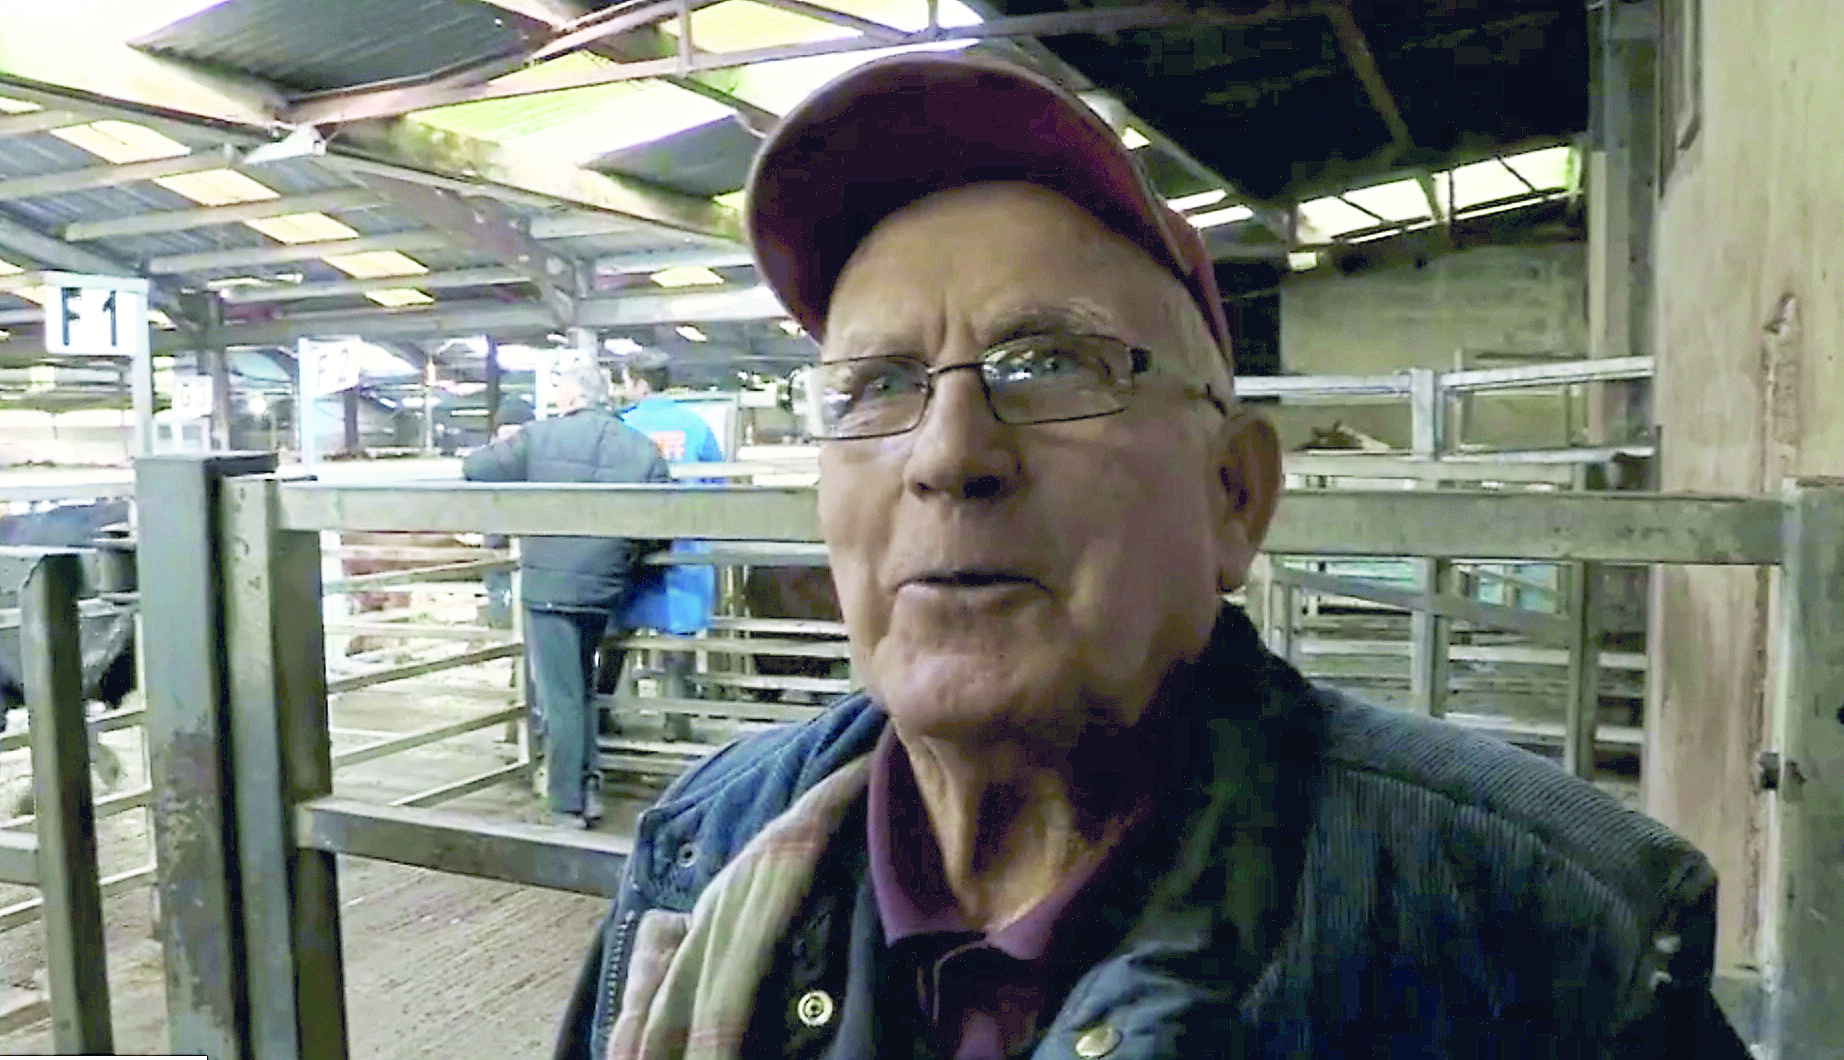 Inquest into death of farmer at Clogher mart, County Tyrone